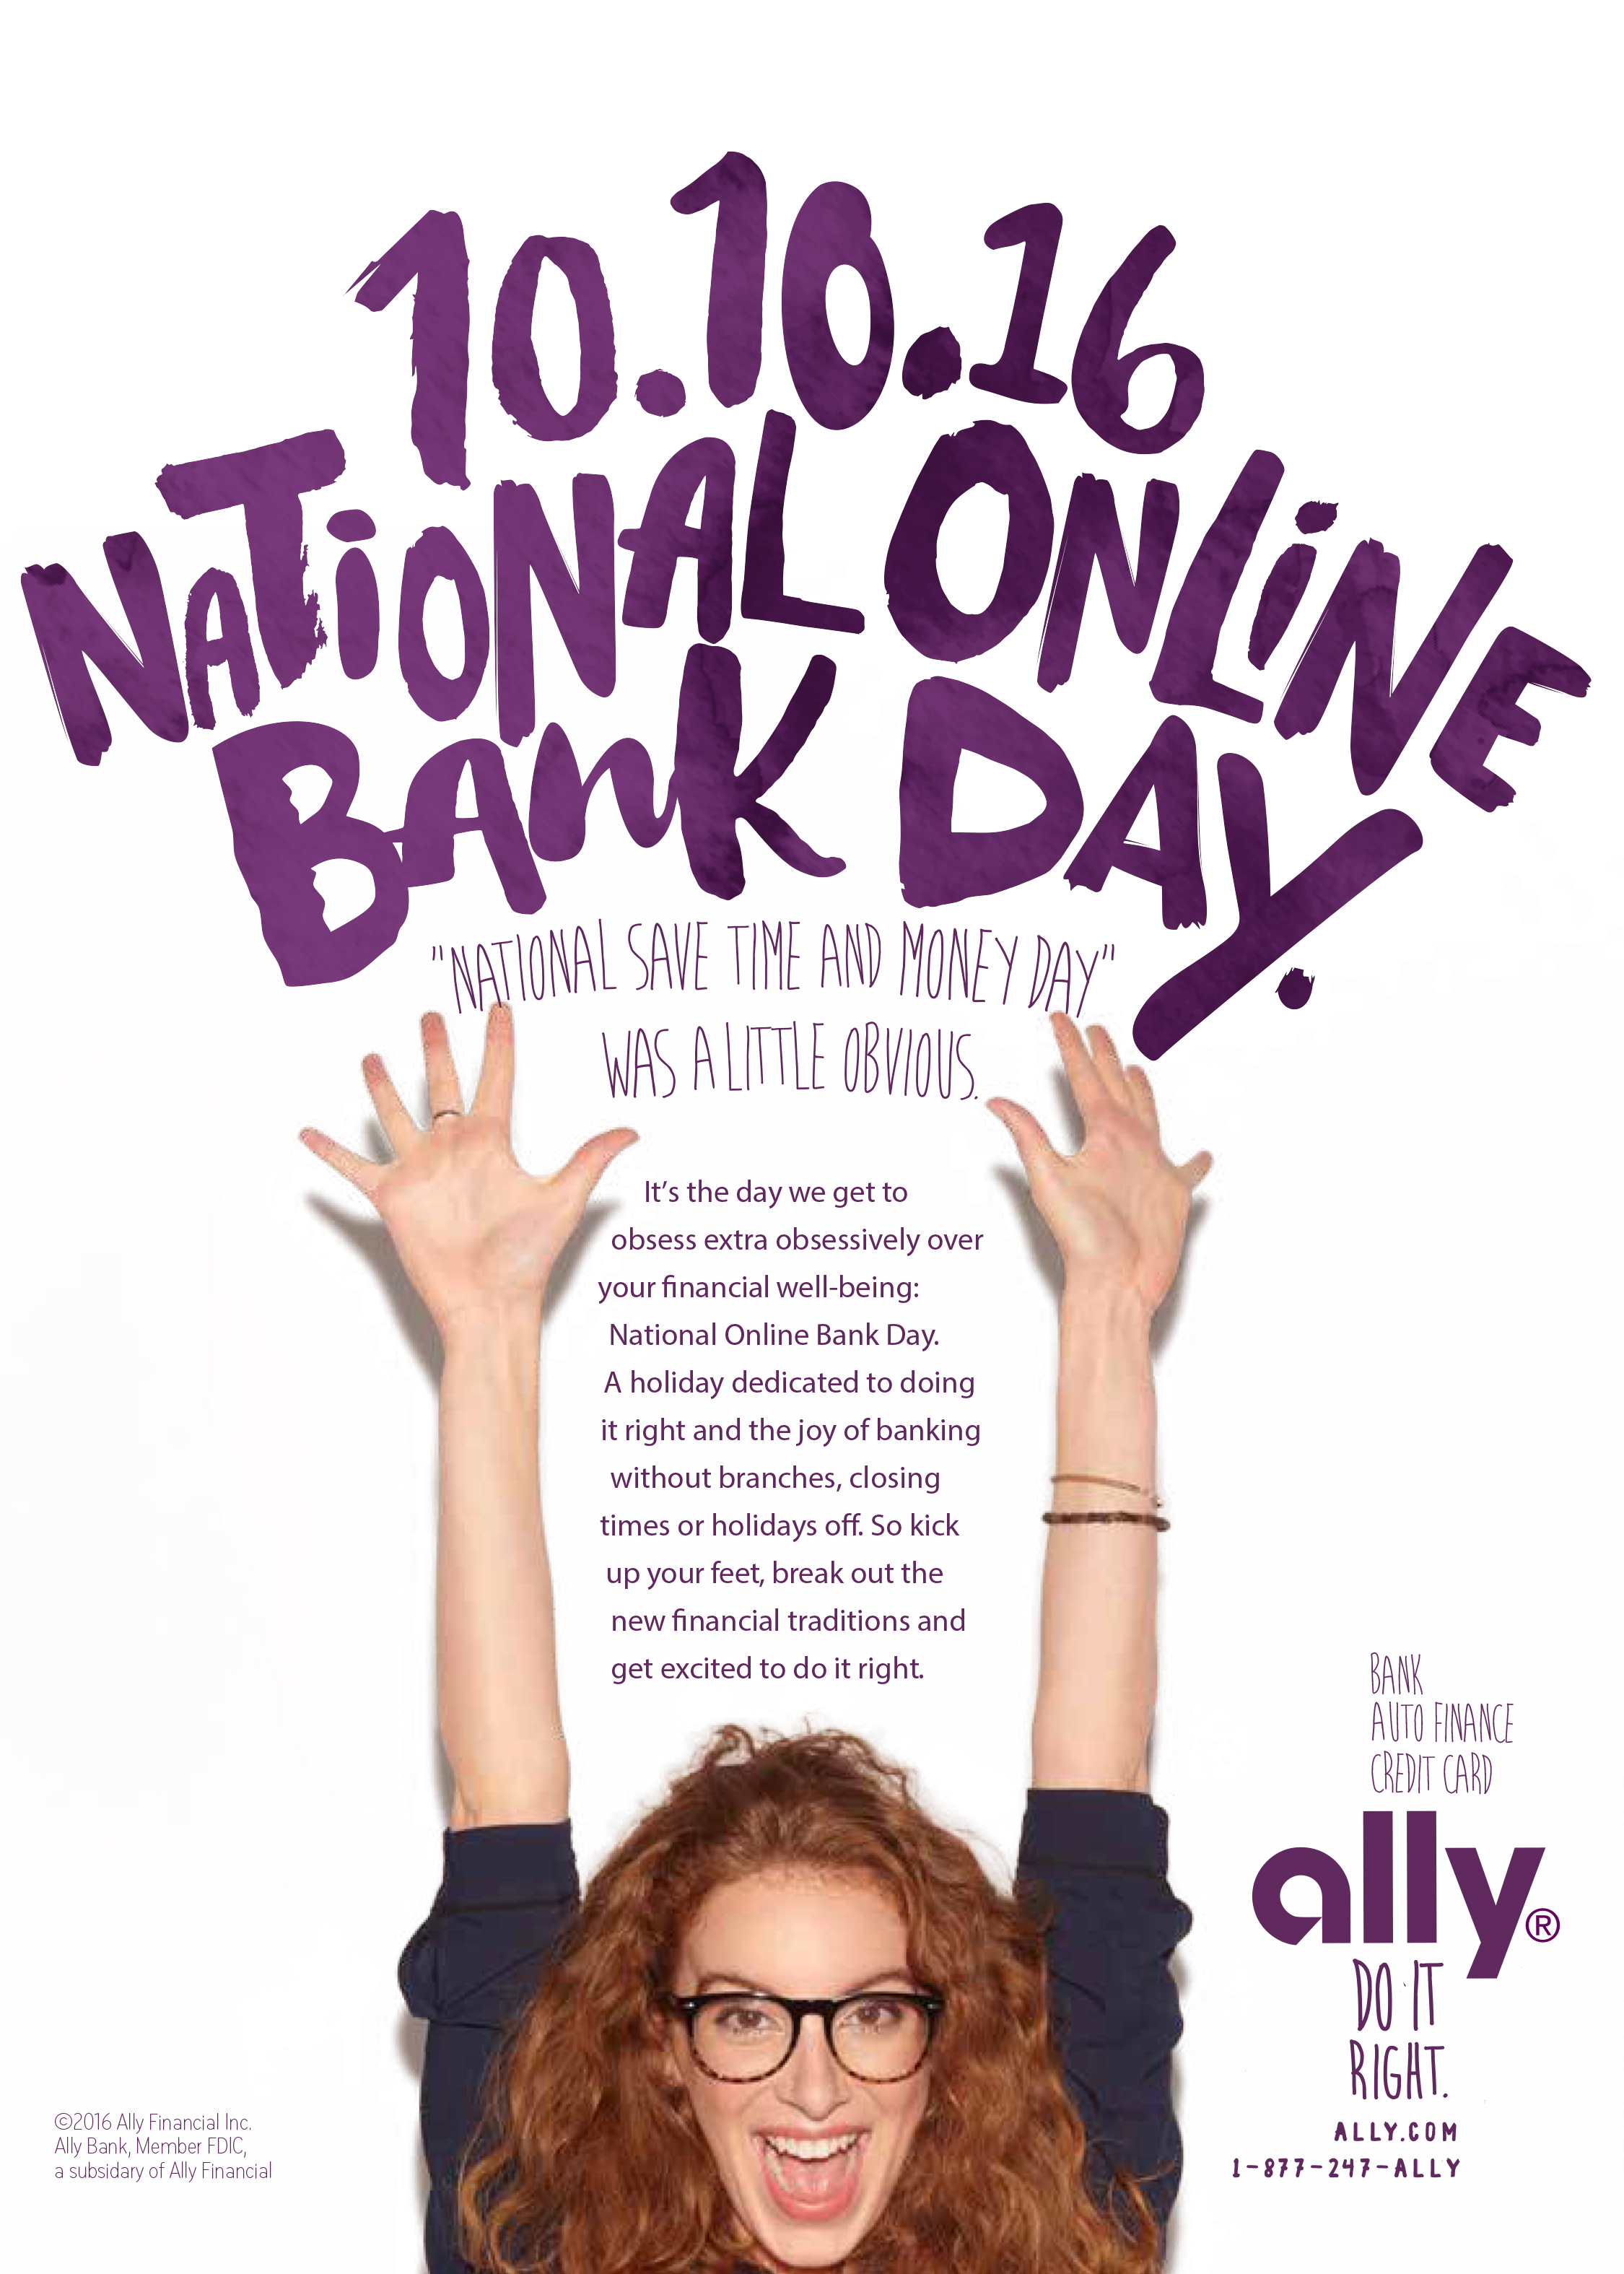 How do you make an Ally Online Auto payment?